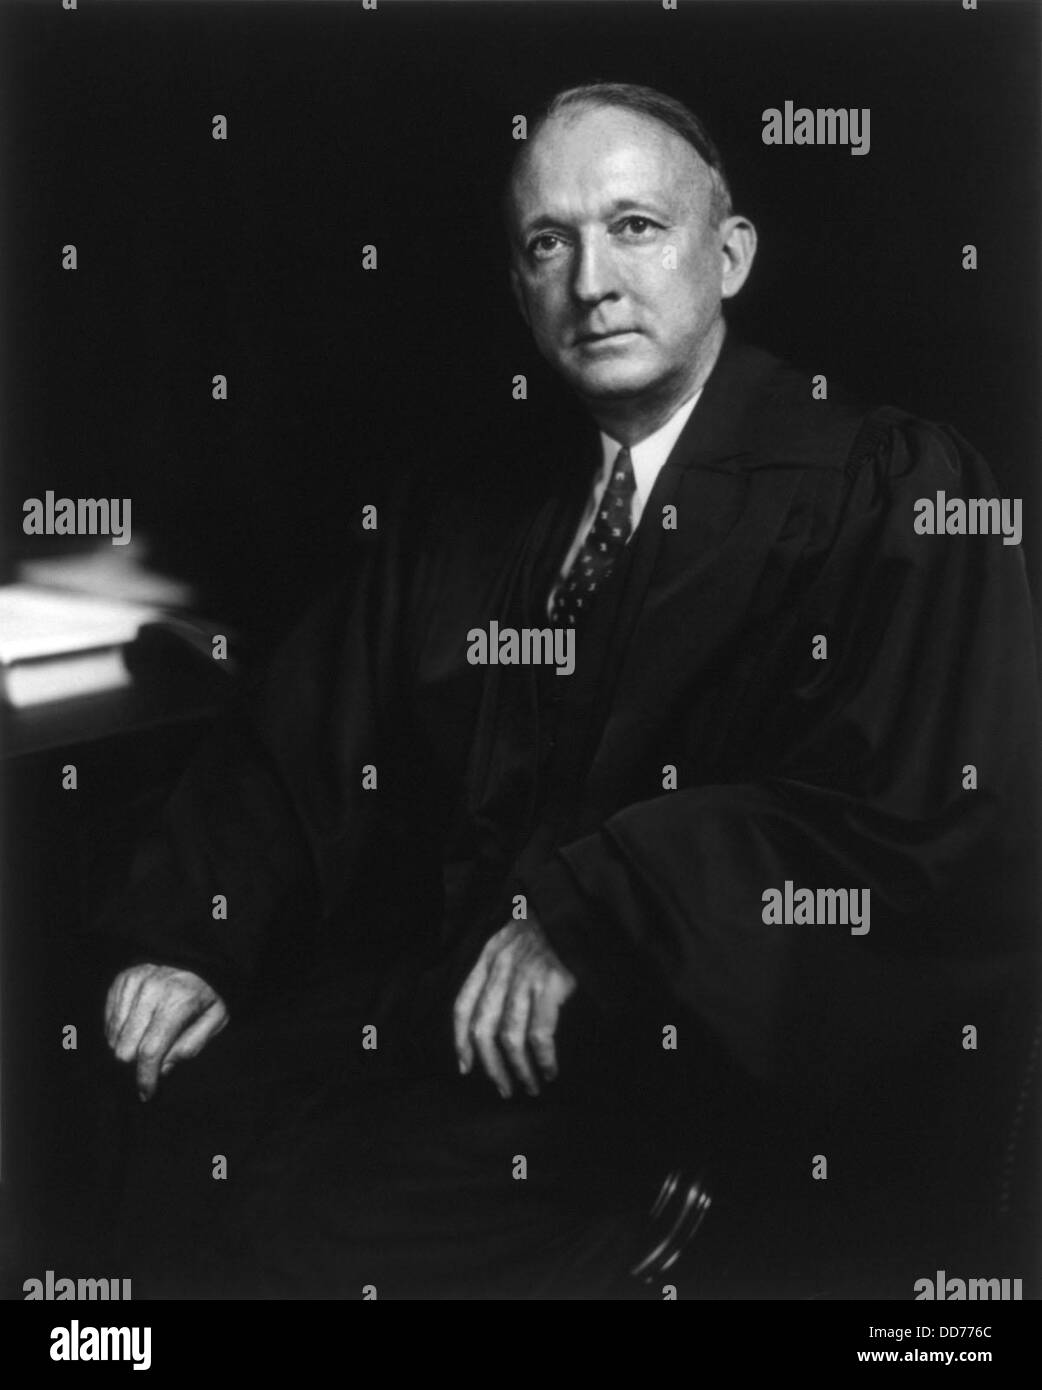 Hugo Black, Supreme Court Justice nominated by FDR in 1937. He was the first Court nominee since 1853 to have his appointment Stock Photo